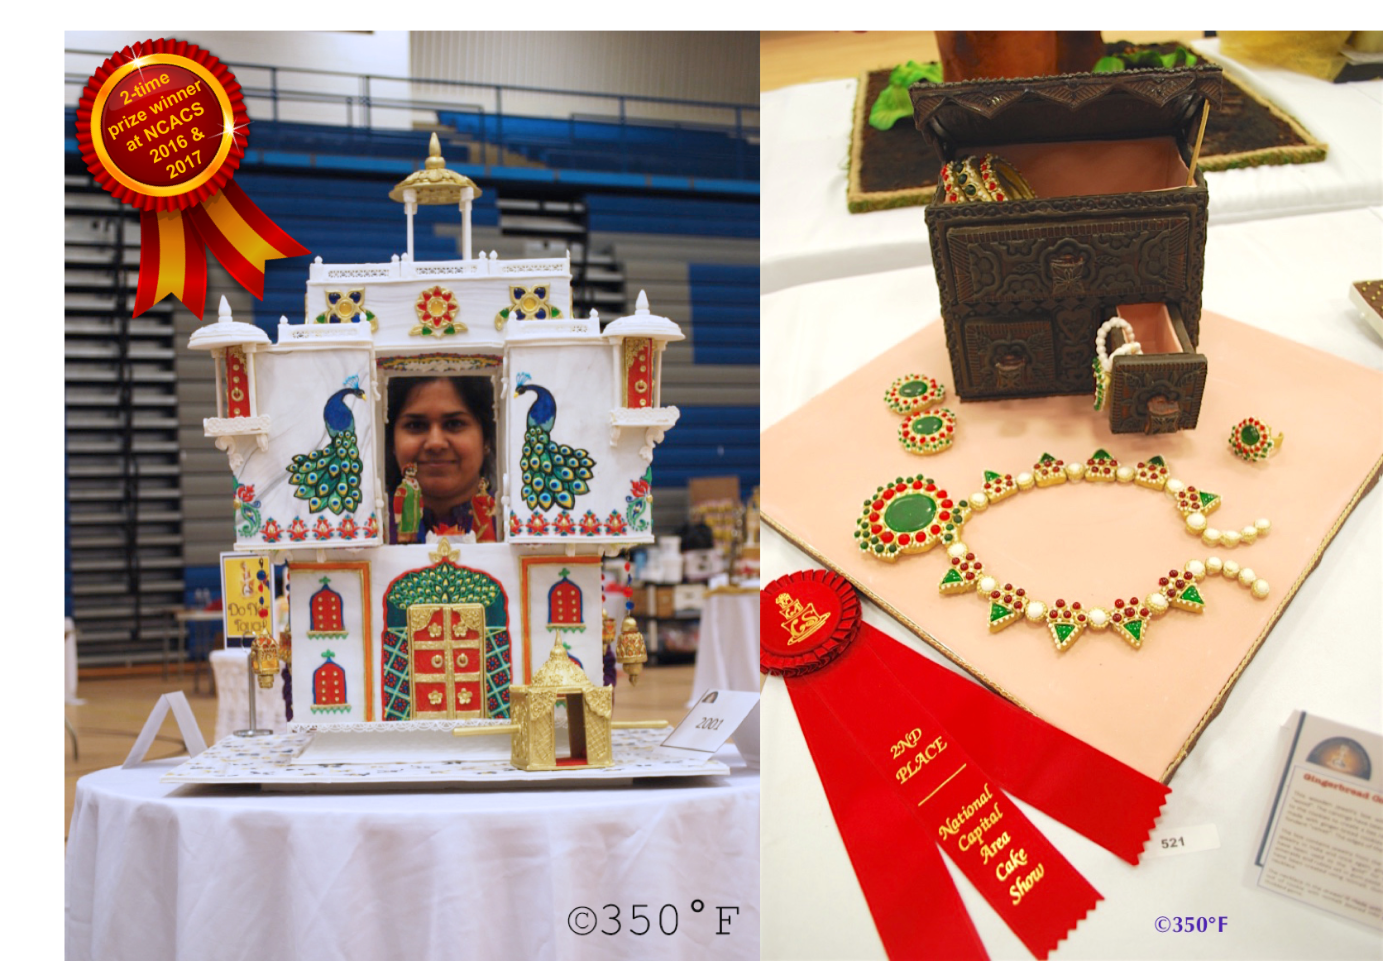 Winner at the National Capital Area Cake Show 2017 in the wedding cake and cookie art categories